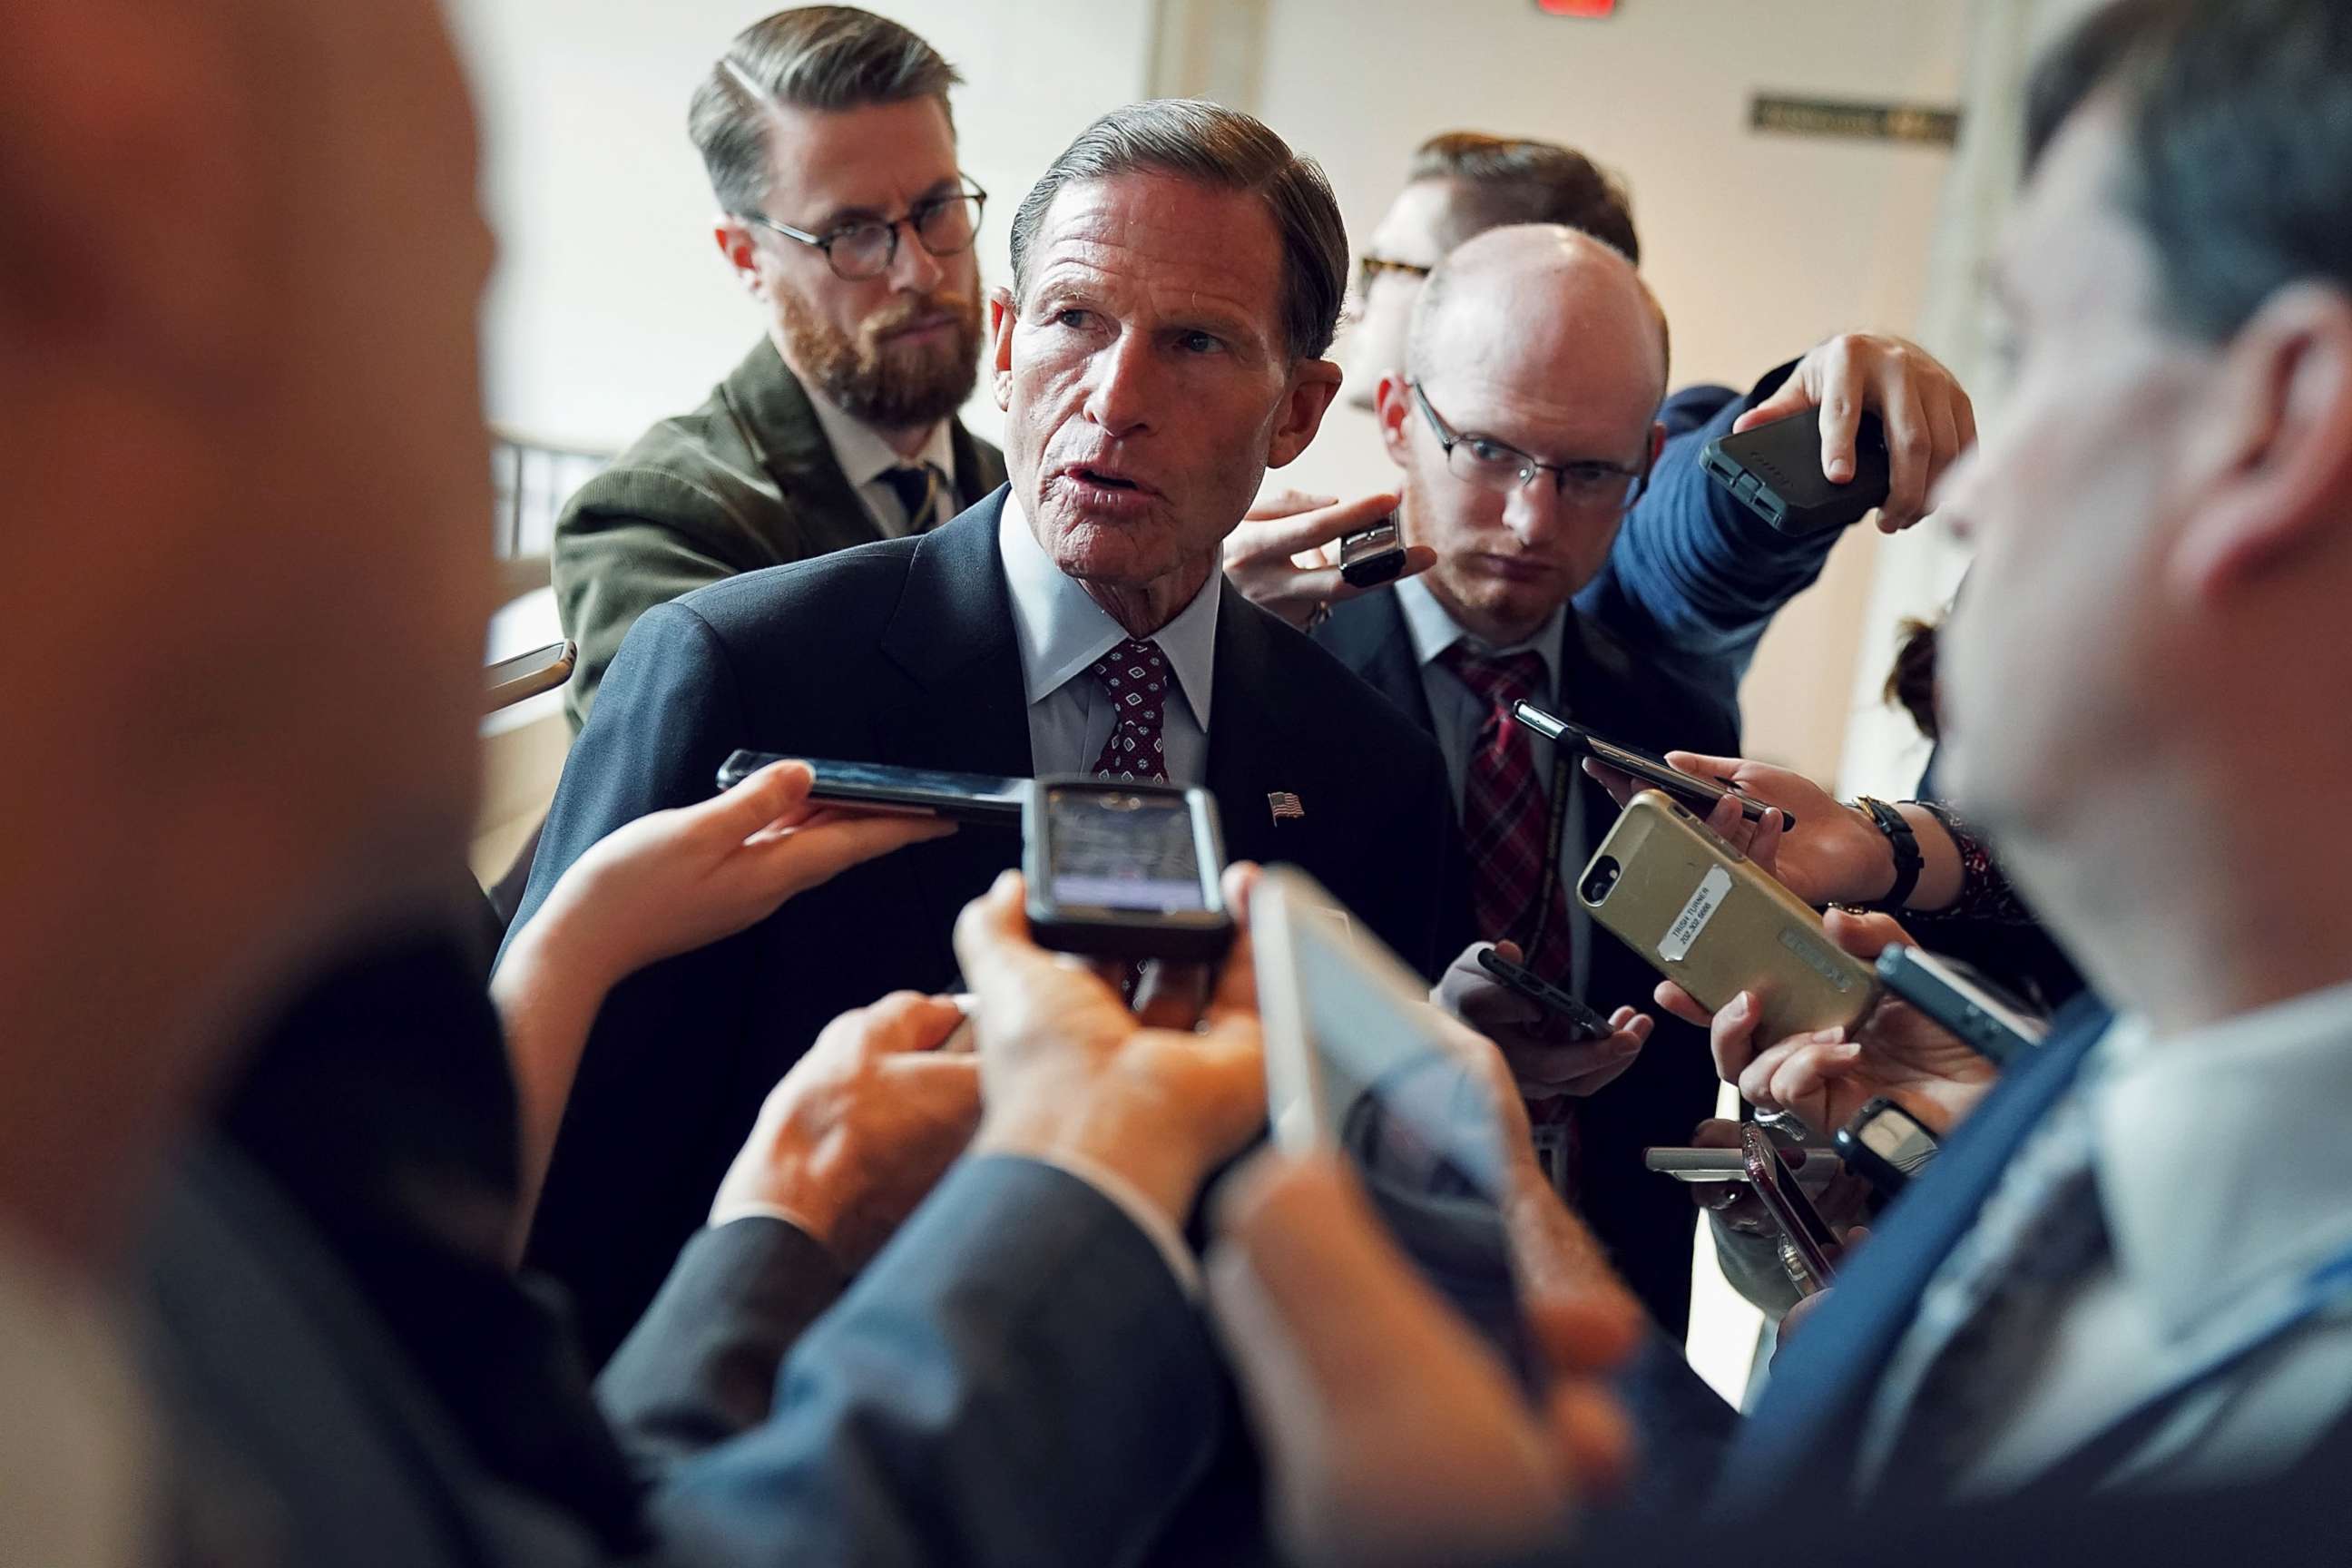 PHOTO: Sen. Richard Blumenthal talks to reporters following a closed-door briefing for the Senate Armed Services Committee at the U.S. Capitol, Oct. 26, 2017 in Washington.